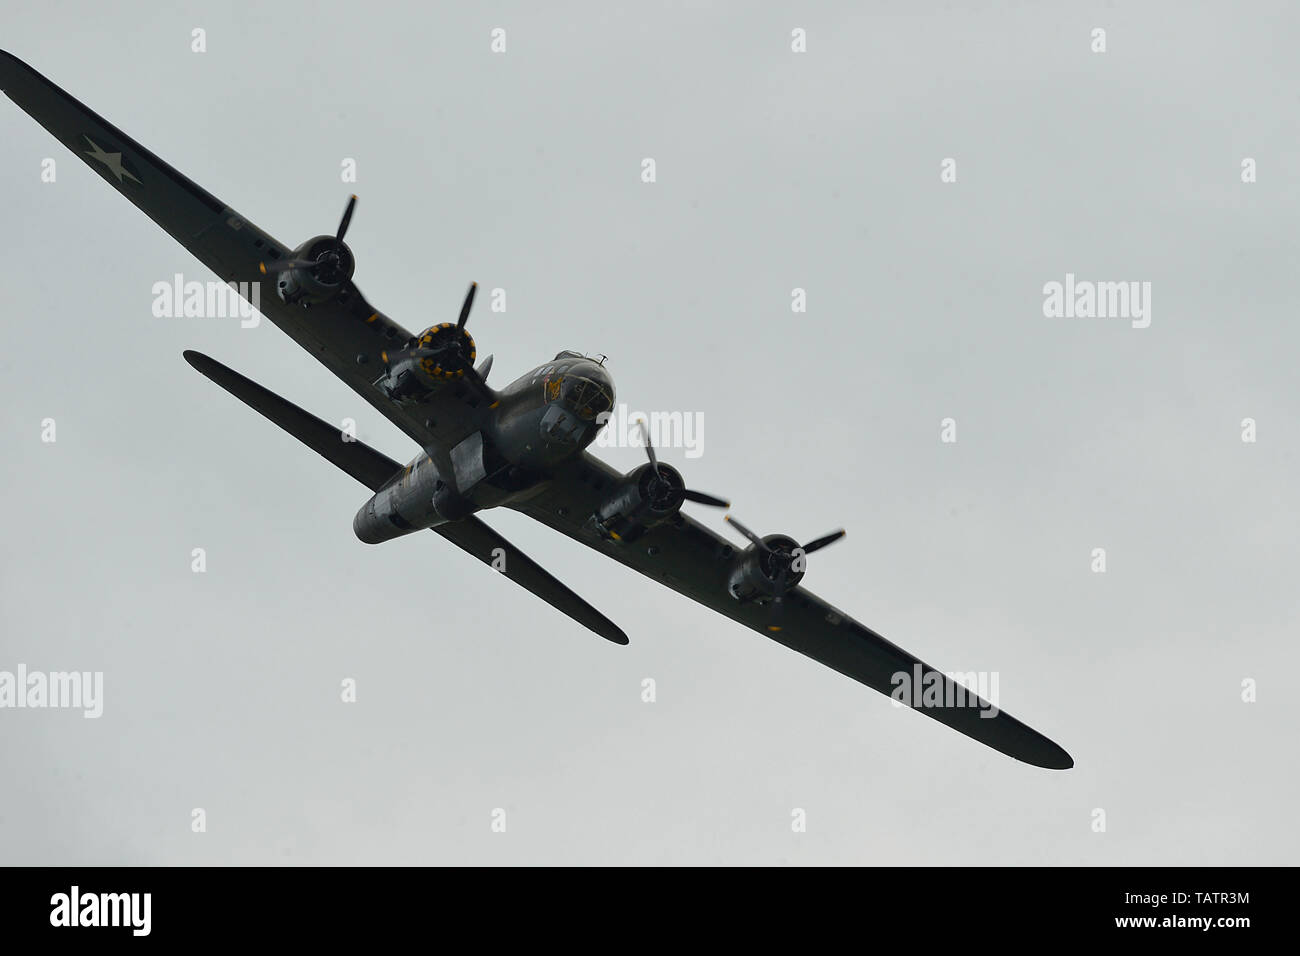 B-17 Flying Fortress G-BEDF 'Sally B' performs an aerial demonstration during the Duxford Air Festival at Imperial War Museum Duxford, England, May 26, 2019. Built as a Boeing B-17G-105-VE c/n 8693, the future Sally B was one of the last to be constructed by the Lockheed-Vega plant at Burbank, California, in 1945. (U.S. Air Force photo by Master Sgt. Eric Burks) Stock Photo